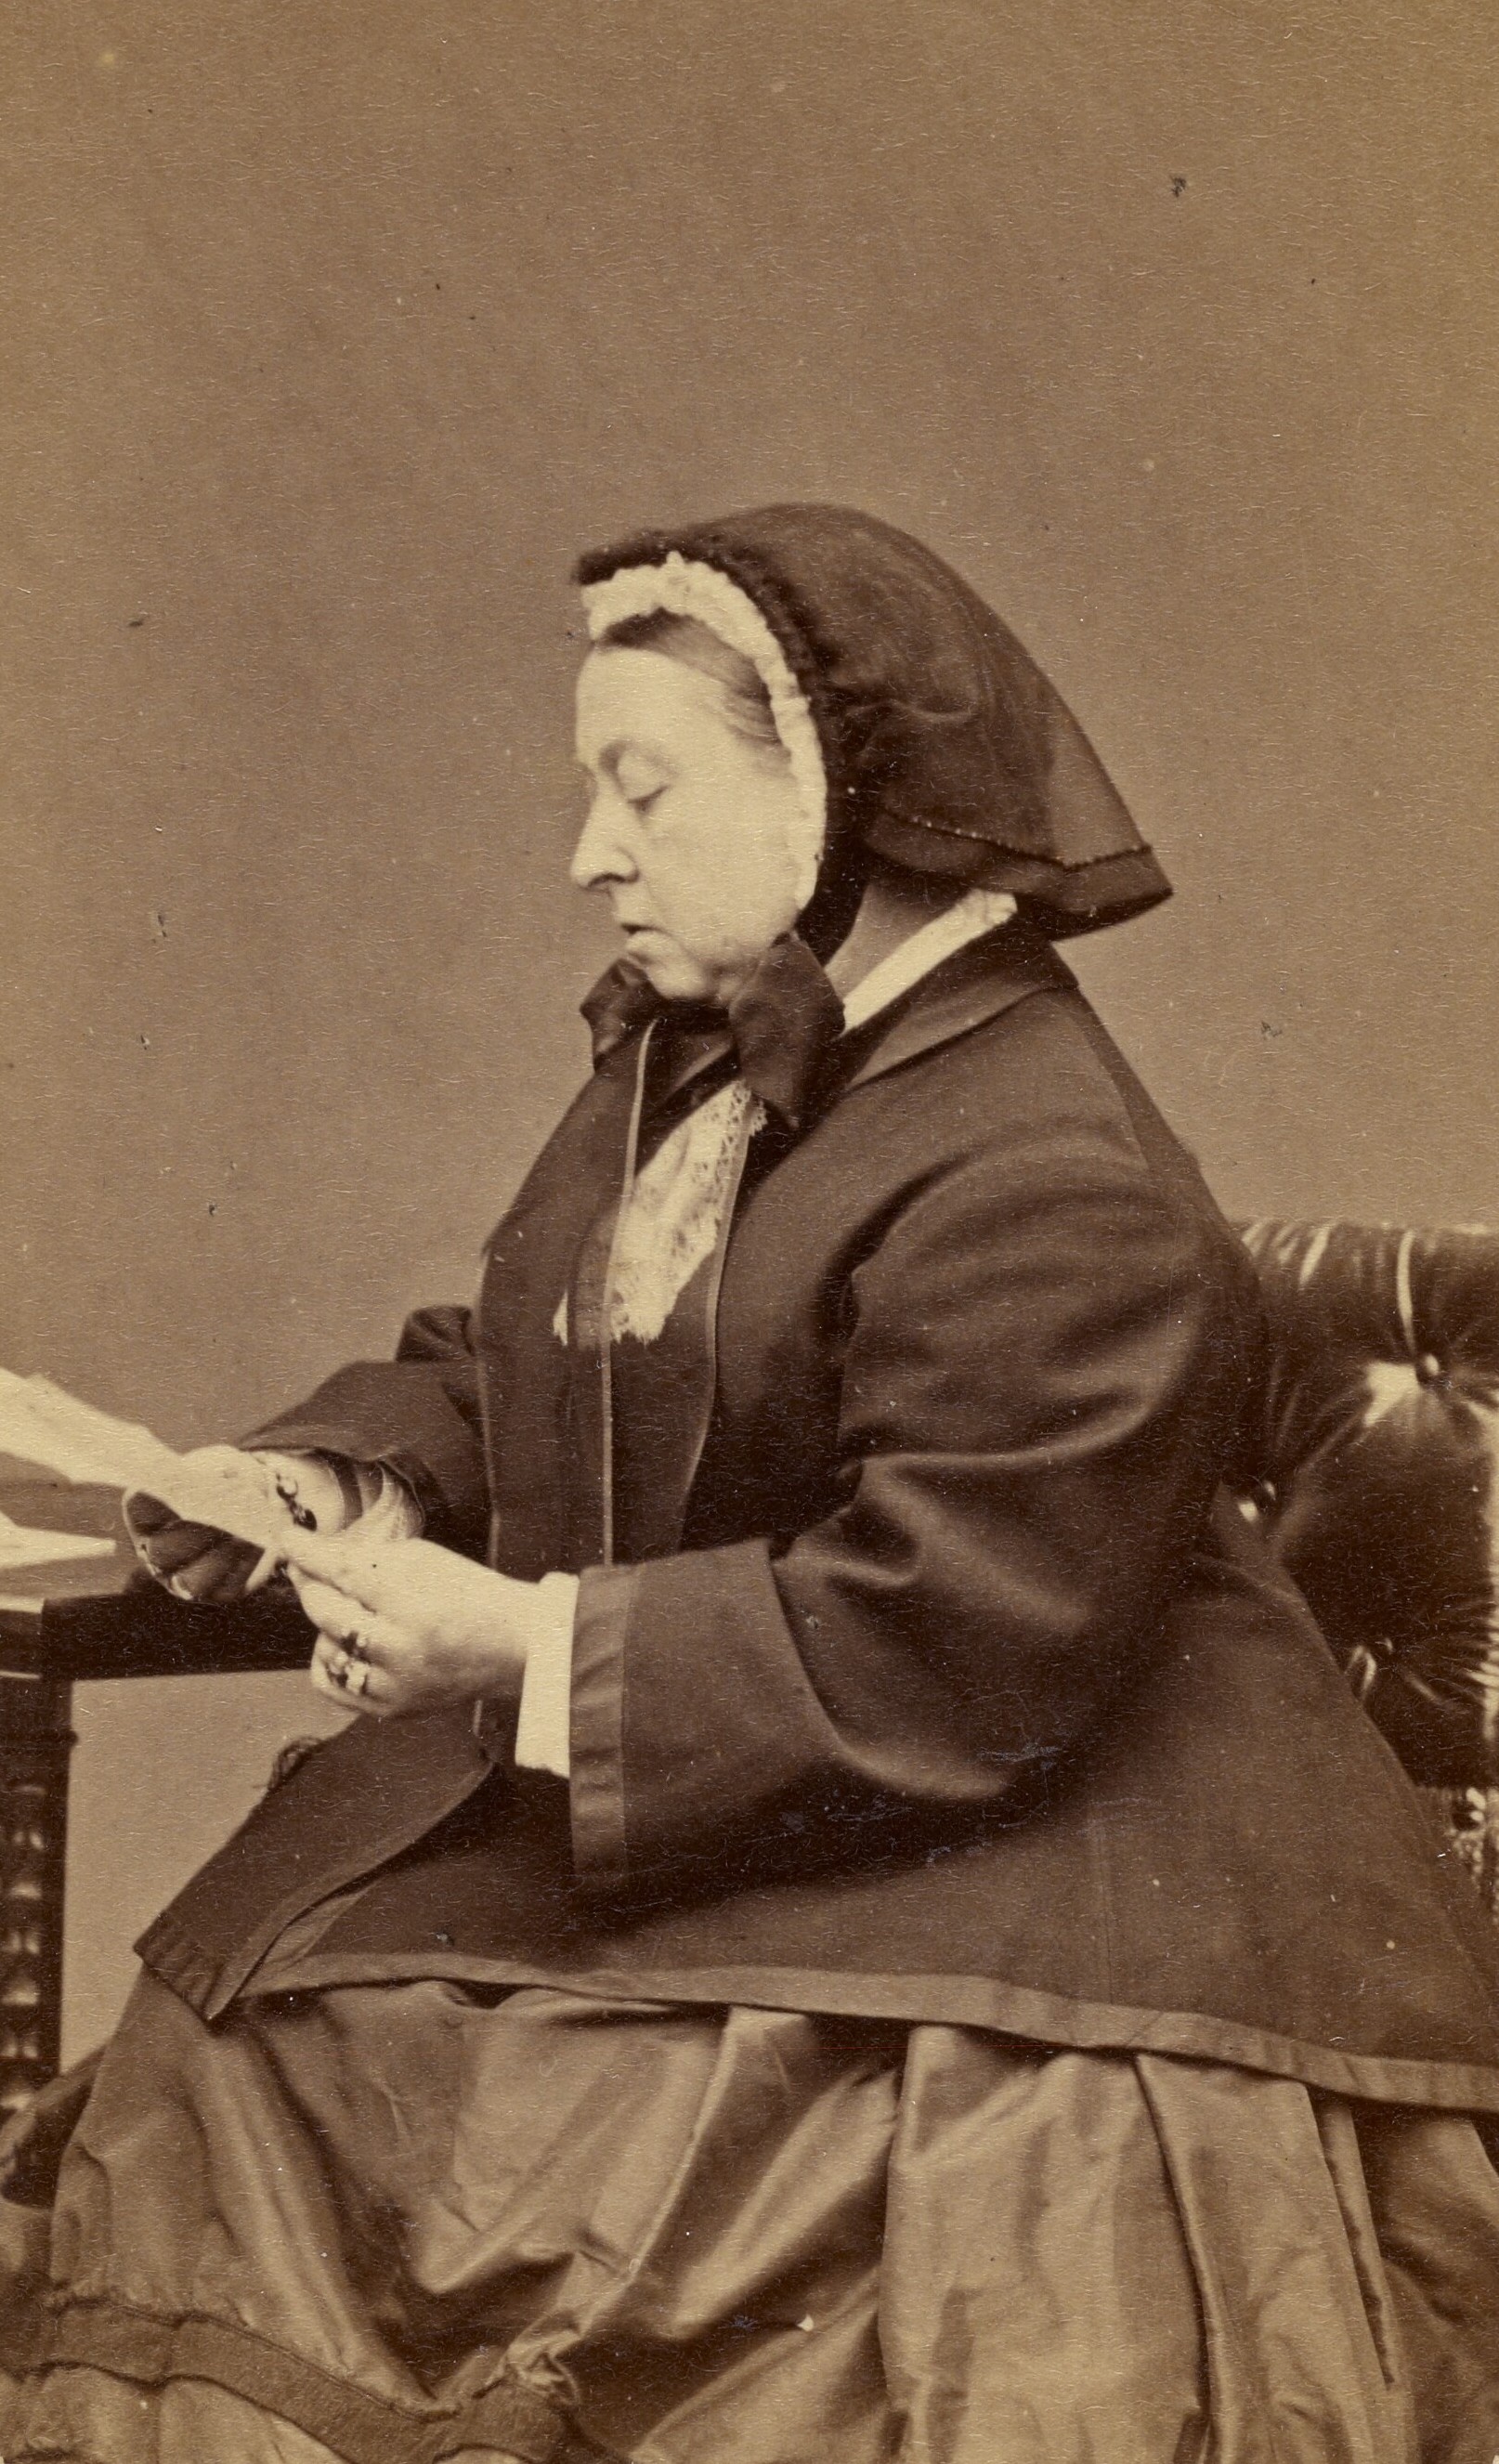 Queen Victoria photographed in the 1880s, wearing black. The J. Paul Getty Museum, Los Angeles. Public Domain.